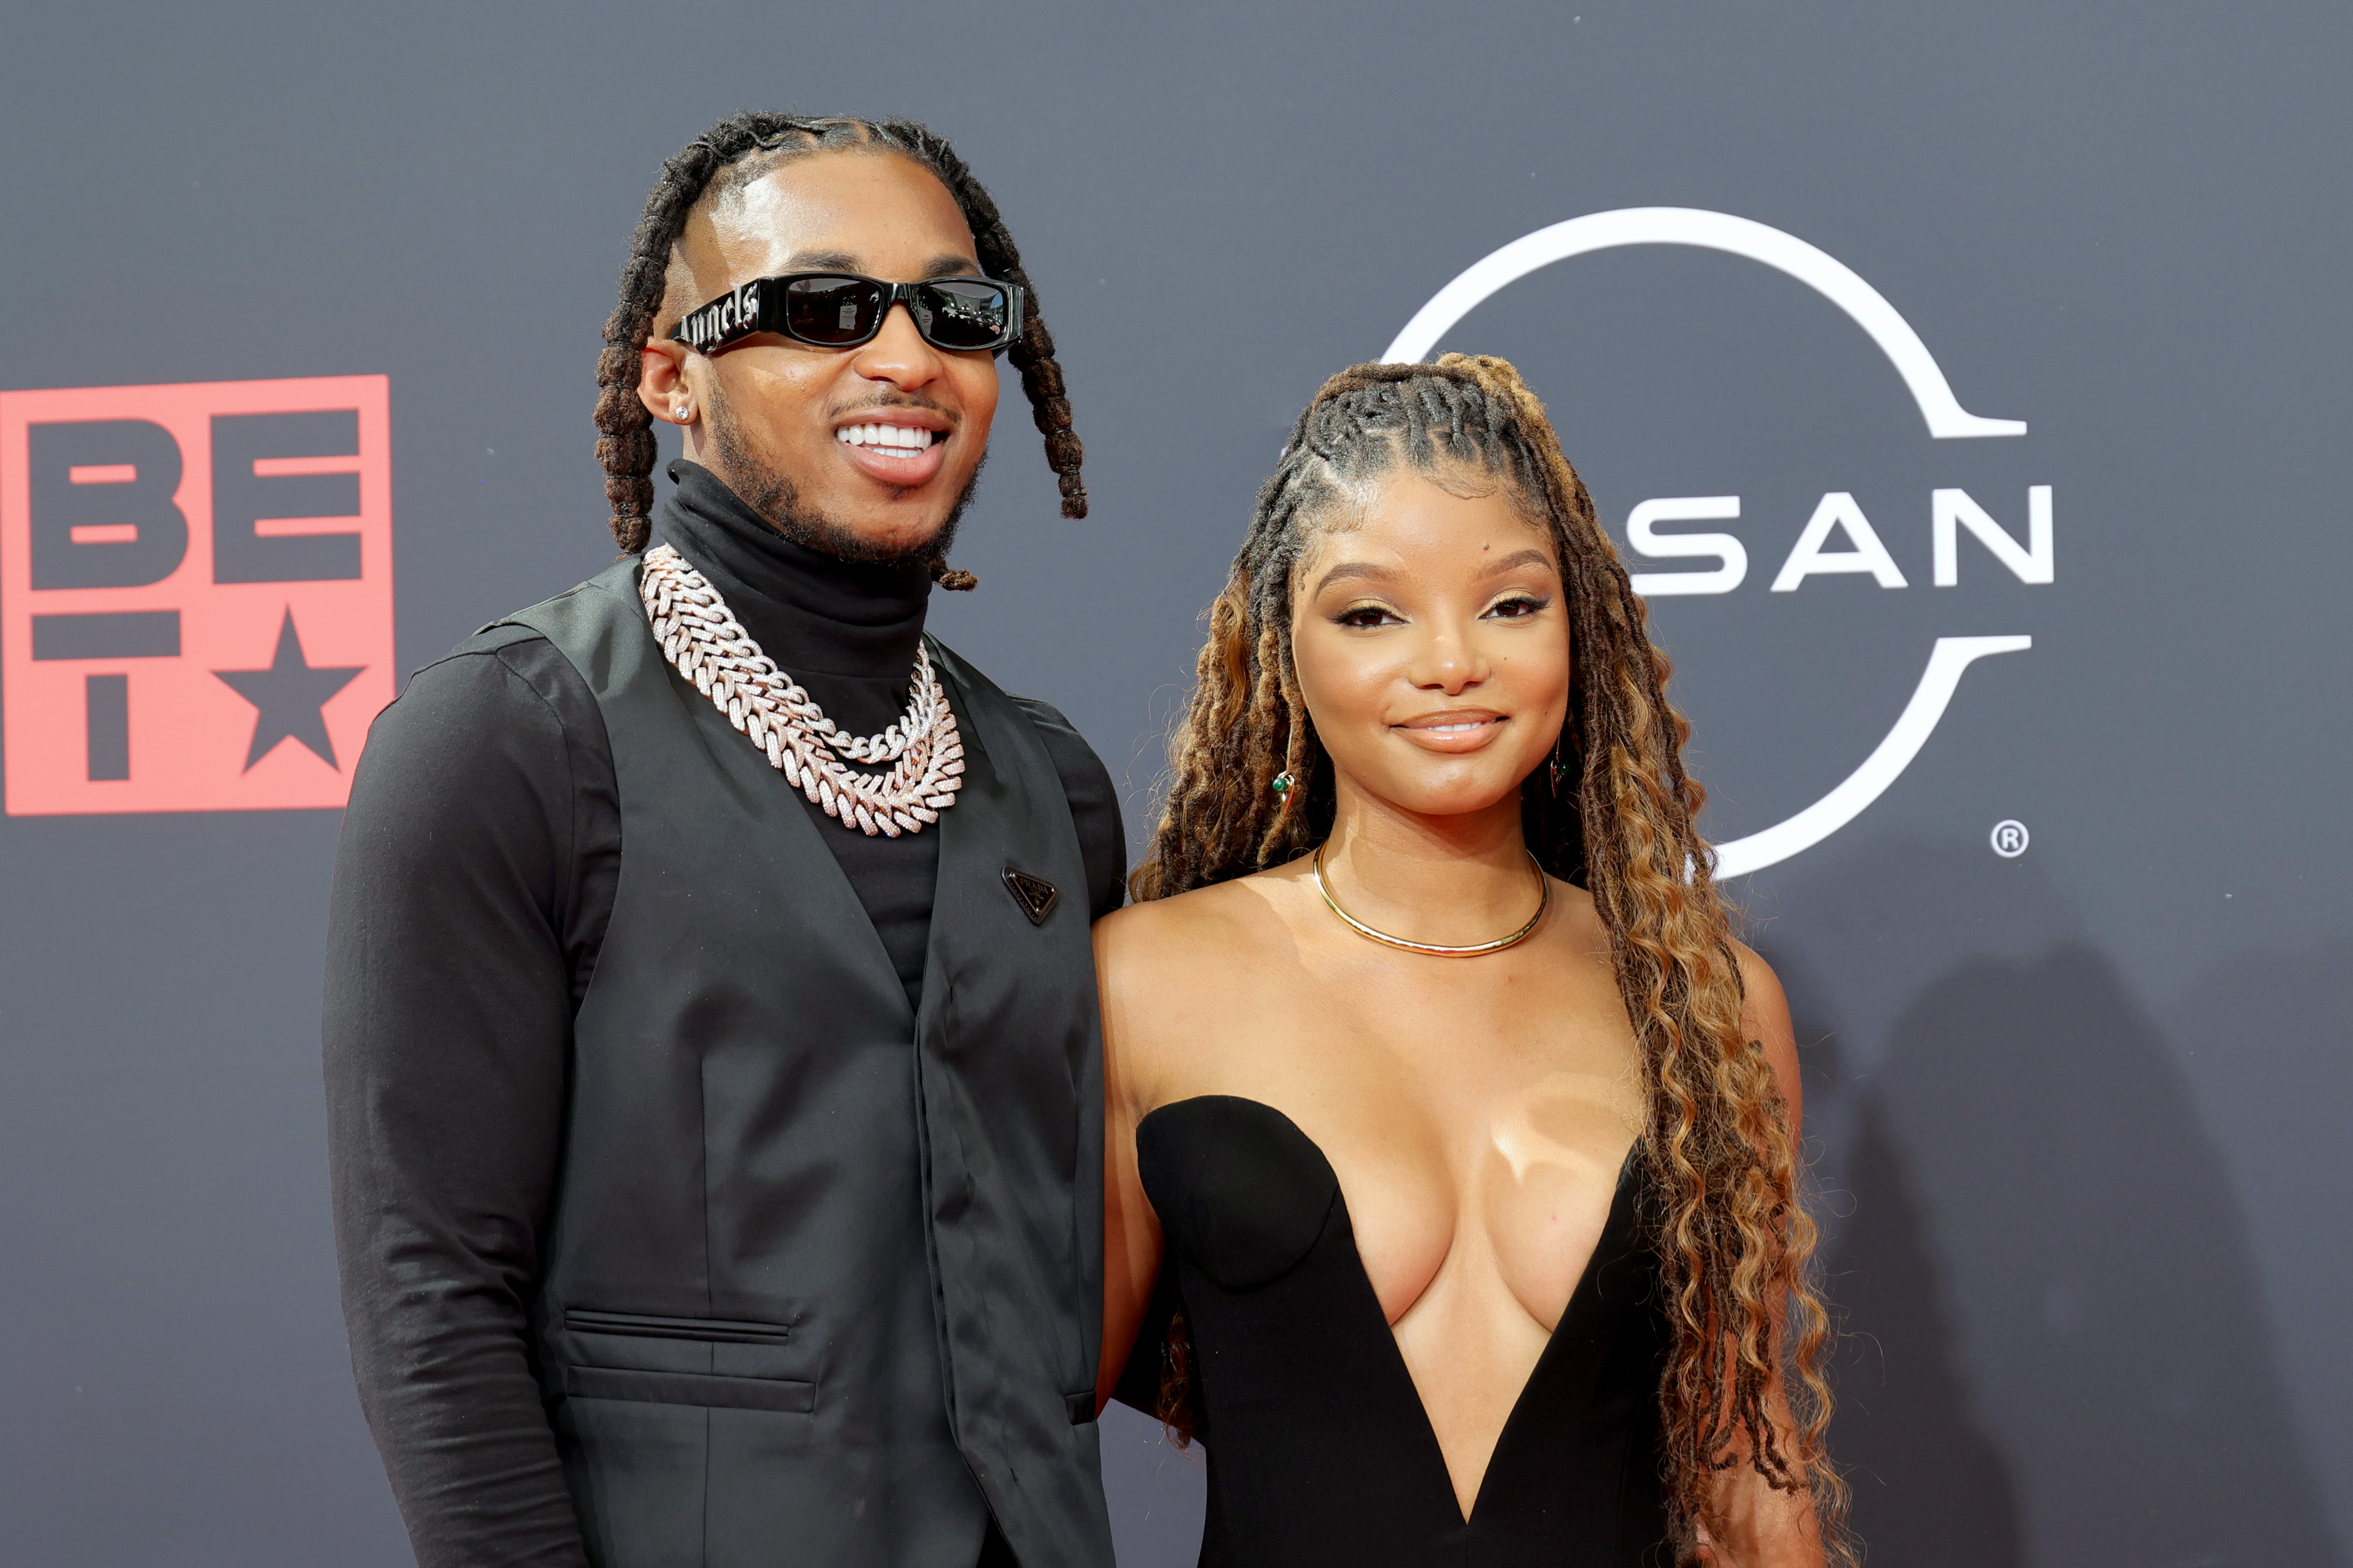 Halle Bailey Jumps For Joy When Seeing DDG Before Covering Him In Kisses For TikTok